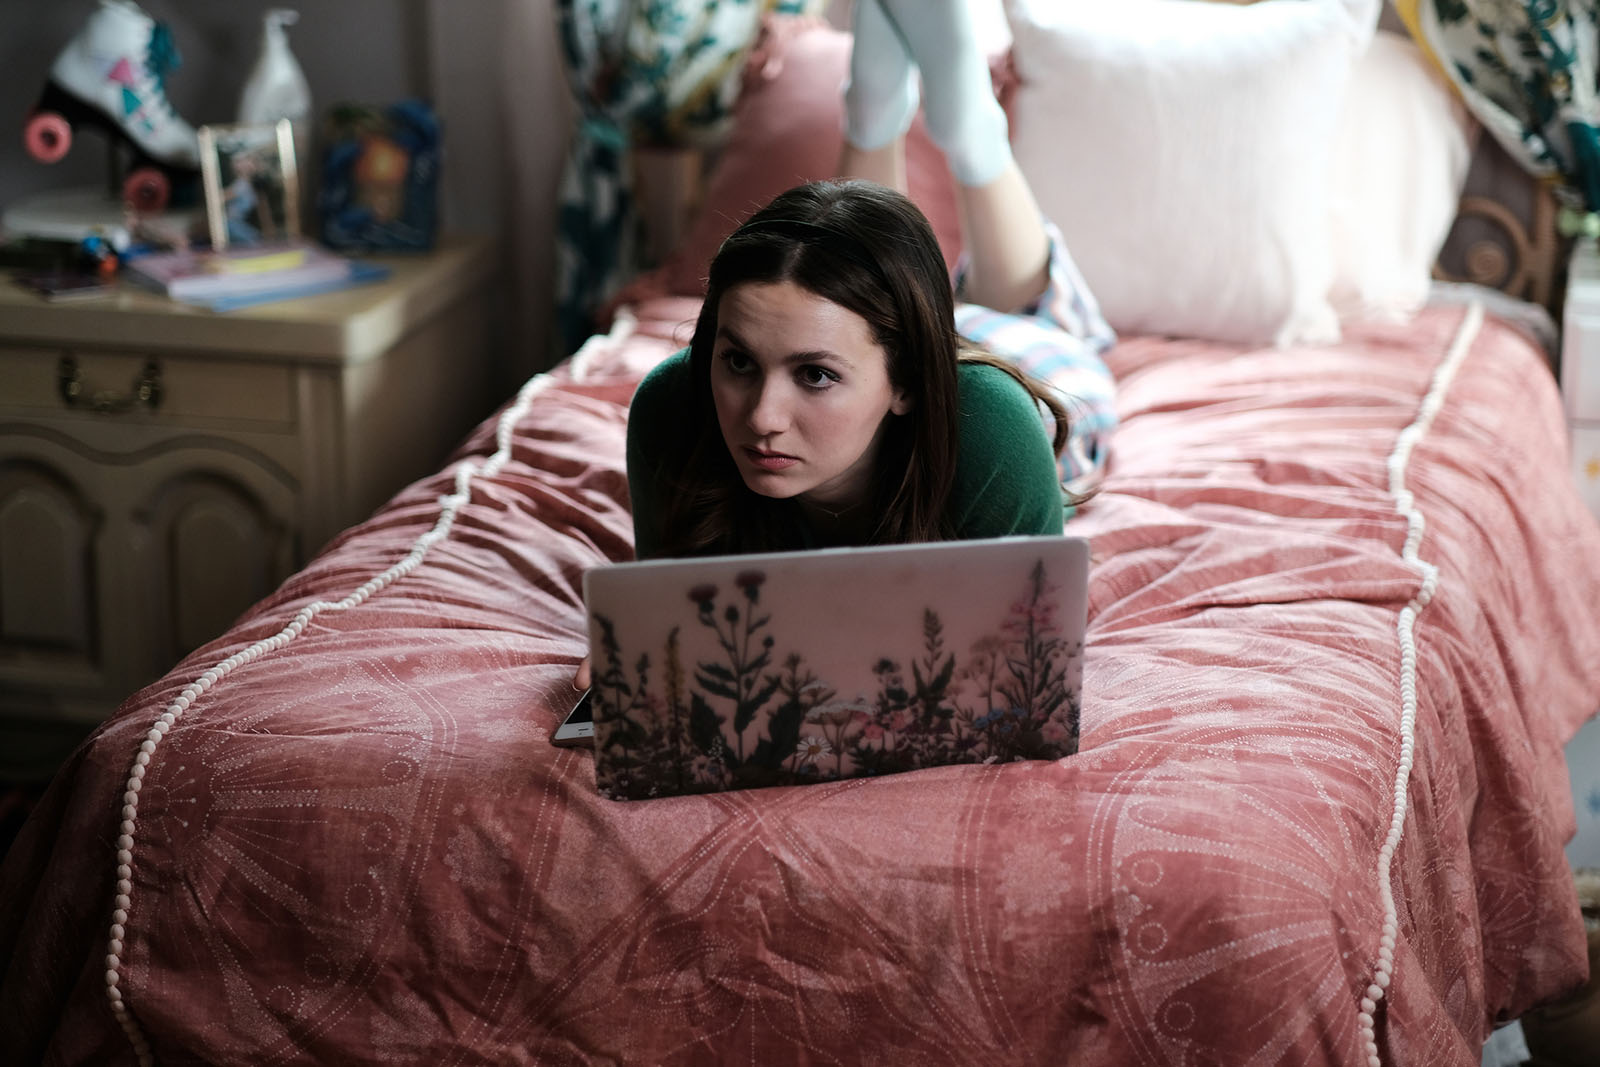 Lexi Howard (played by Maude Apatow) is either a supportive friend, or an enabler, depending on your take. Image © HBO